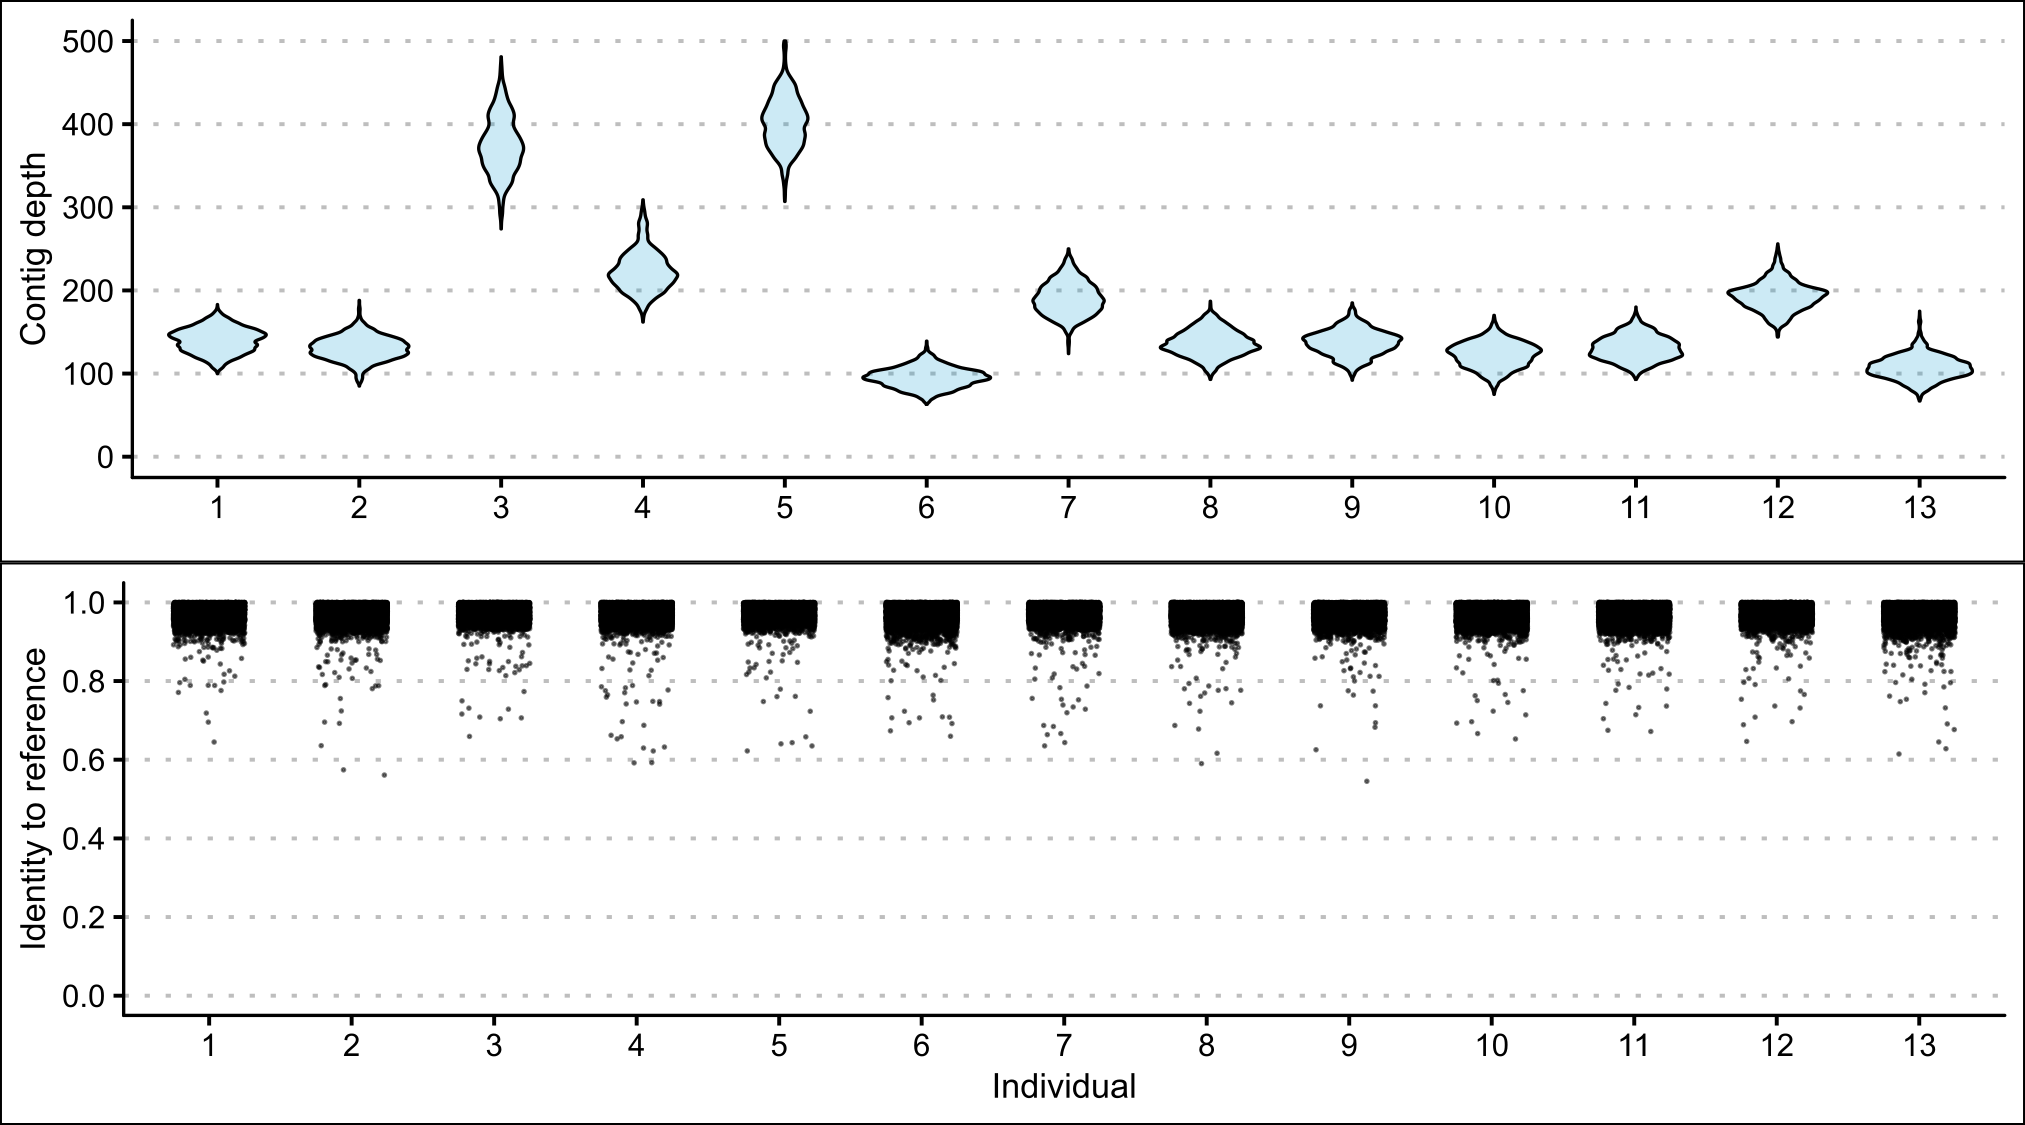 A comparison of contig scaffolds from thirteen *P. georgianus* individuals mapped to *C. equula 2* including the range in contig depth and percentage identity at each nucleotide position.